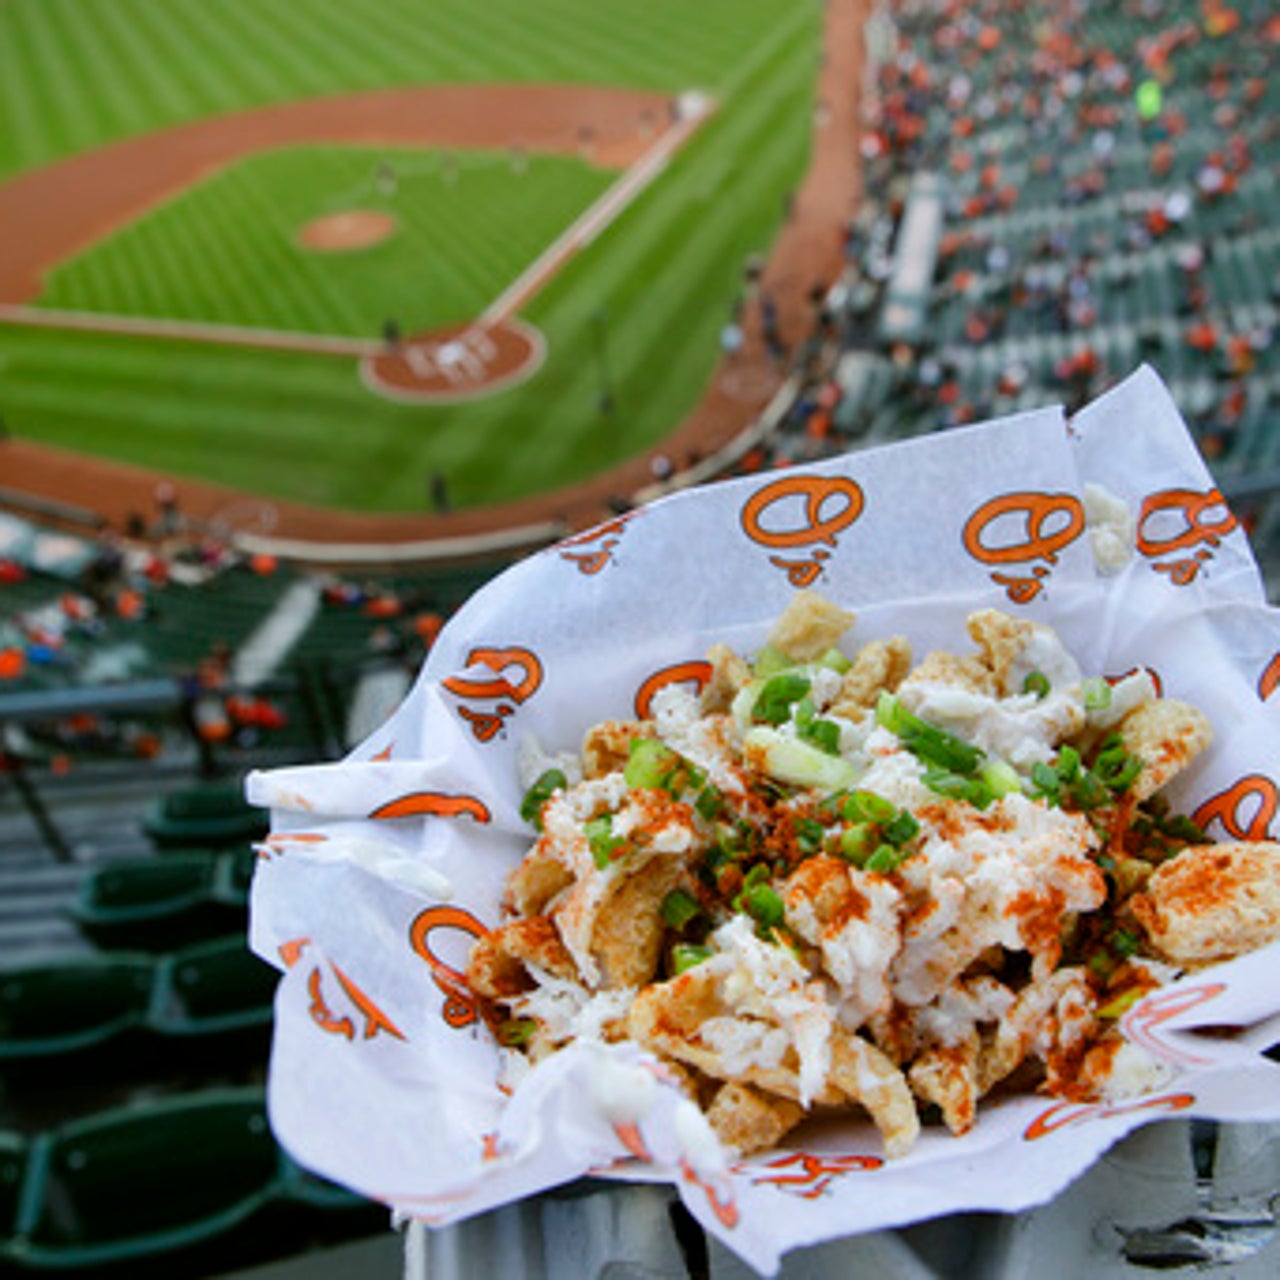 At Seattle Mariners games, grasshoppers are a favorite snack